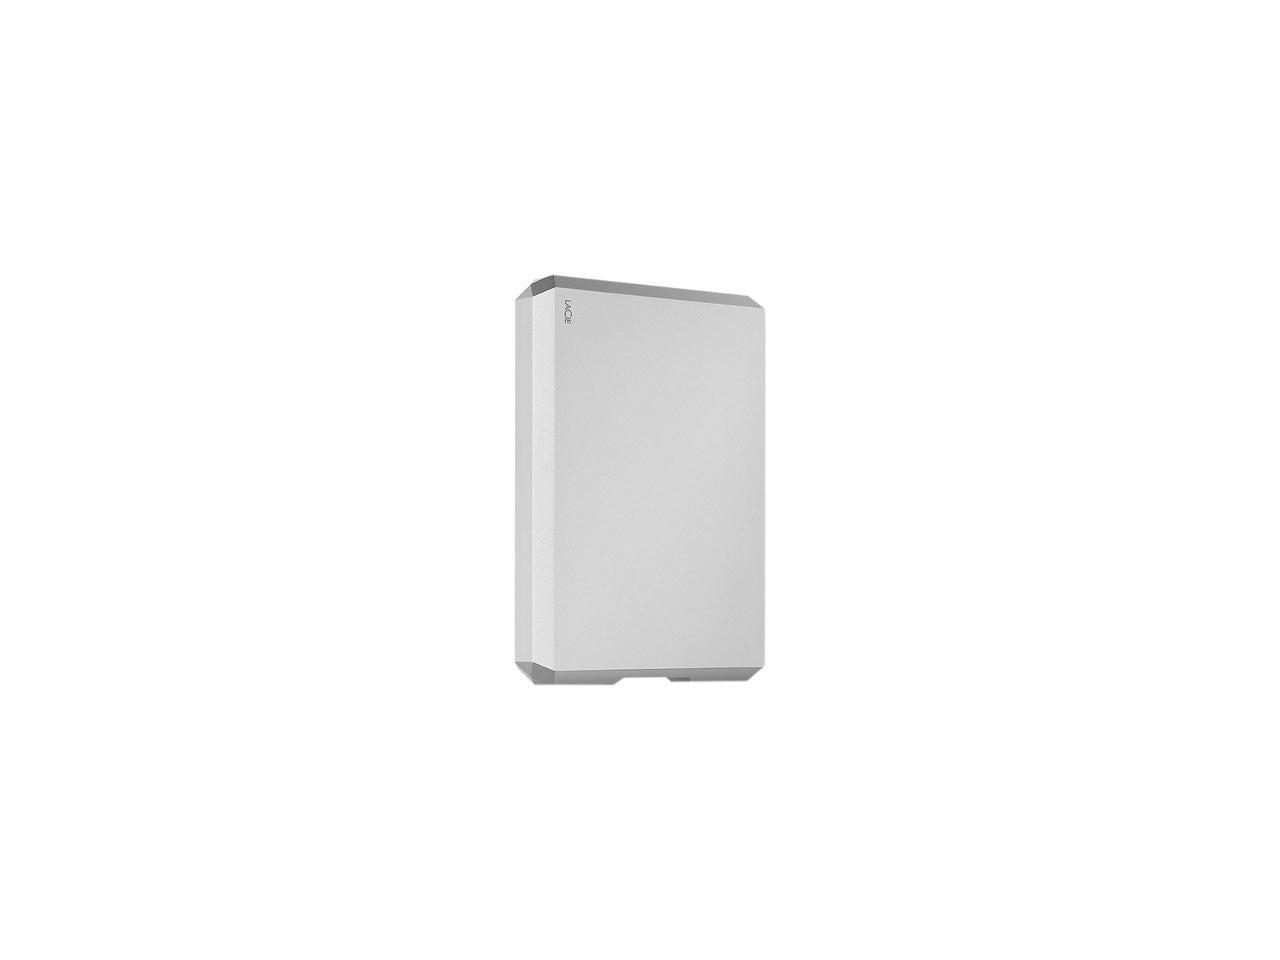 Lacie Mobile Drive 5Tb External Hard Drive Portable Hdd - Moon Silver Usb-C Usb 3.0, For Mac And Pc Desktop, 1 Month Adobe Cc (Sthg5000400)